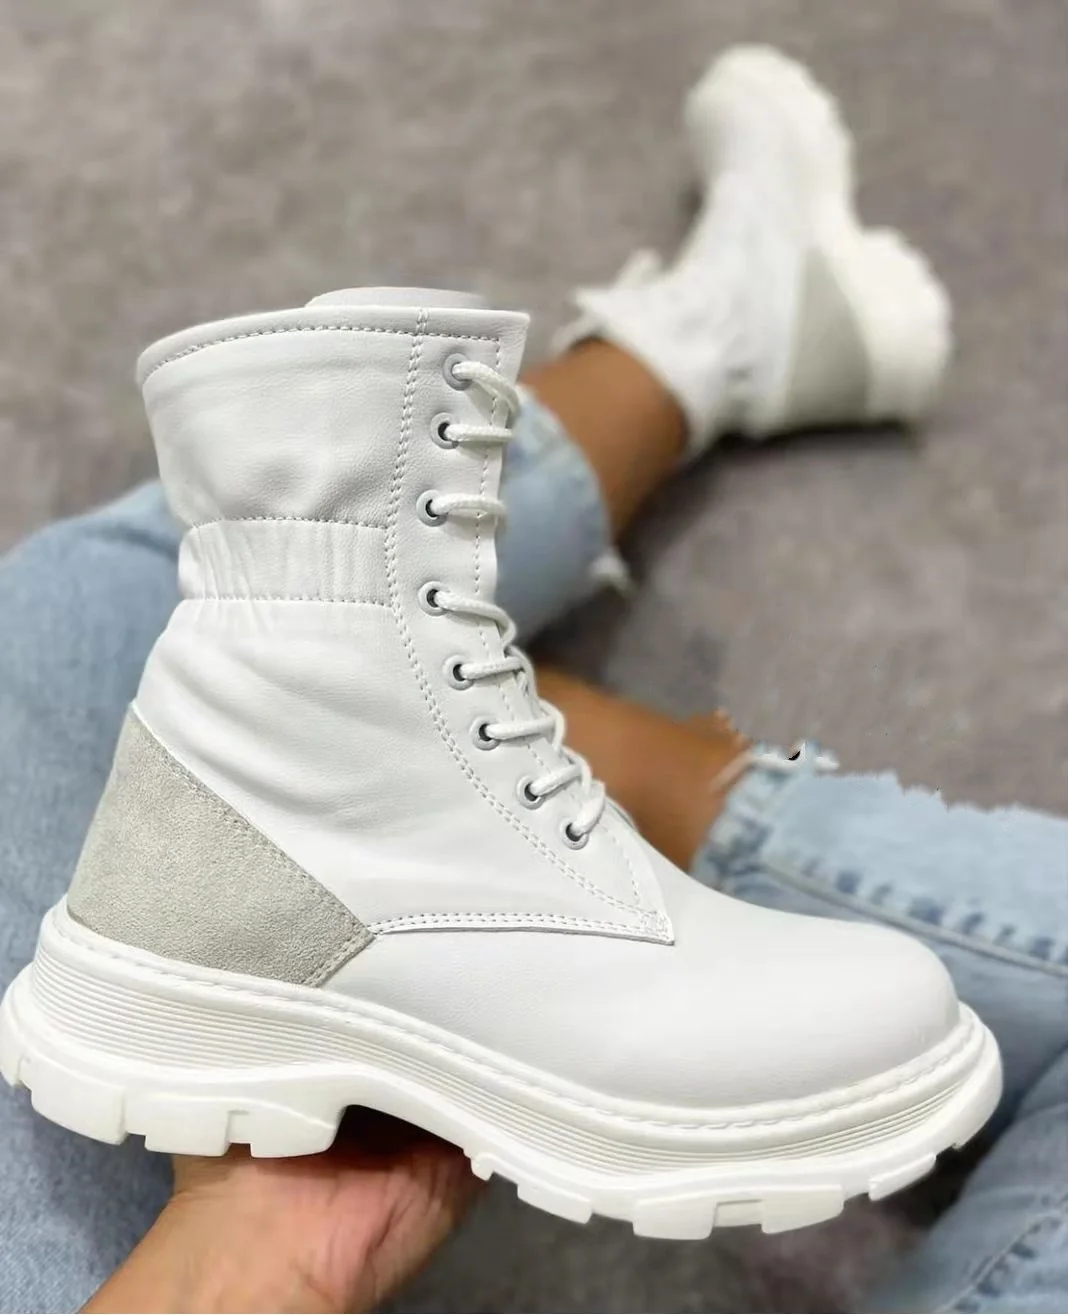 

New Design Women High-heeled Shoe Sexy High Heel Round Toe Thick Sole Women Ankle Boots Front Lace Up Platform Warm Short Bootie, Black white grey